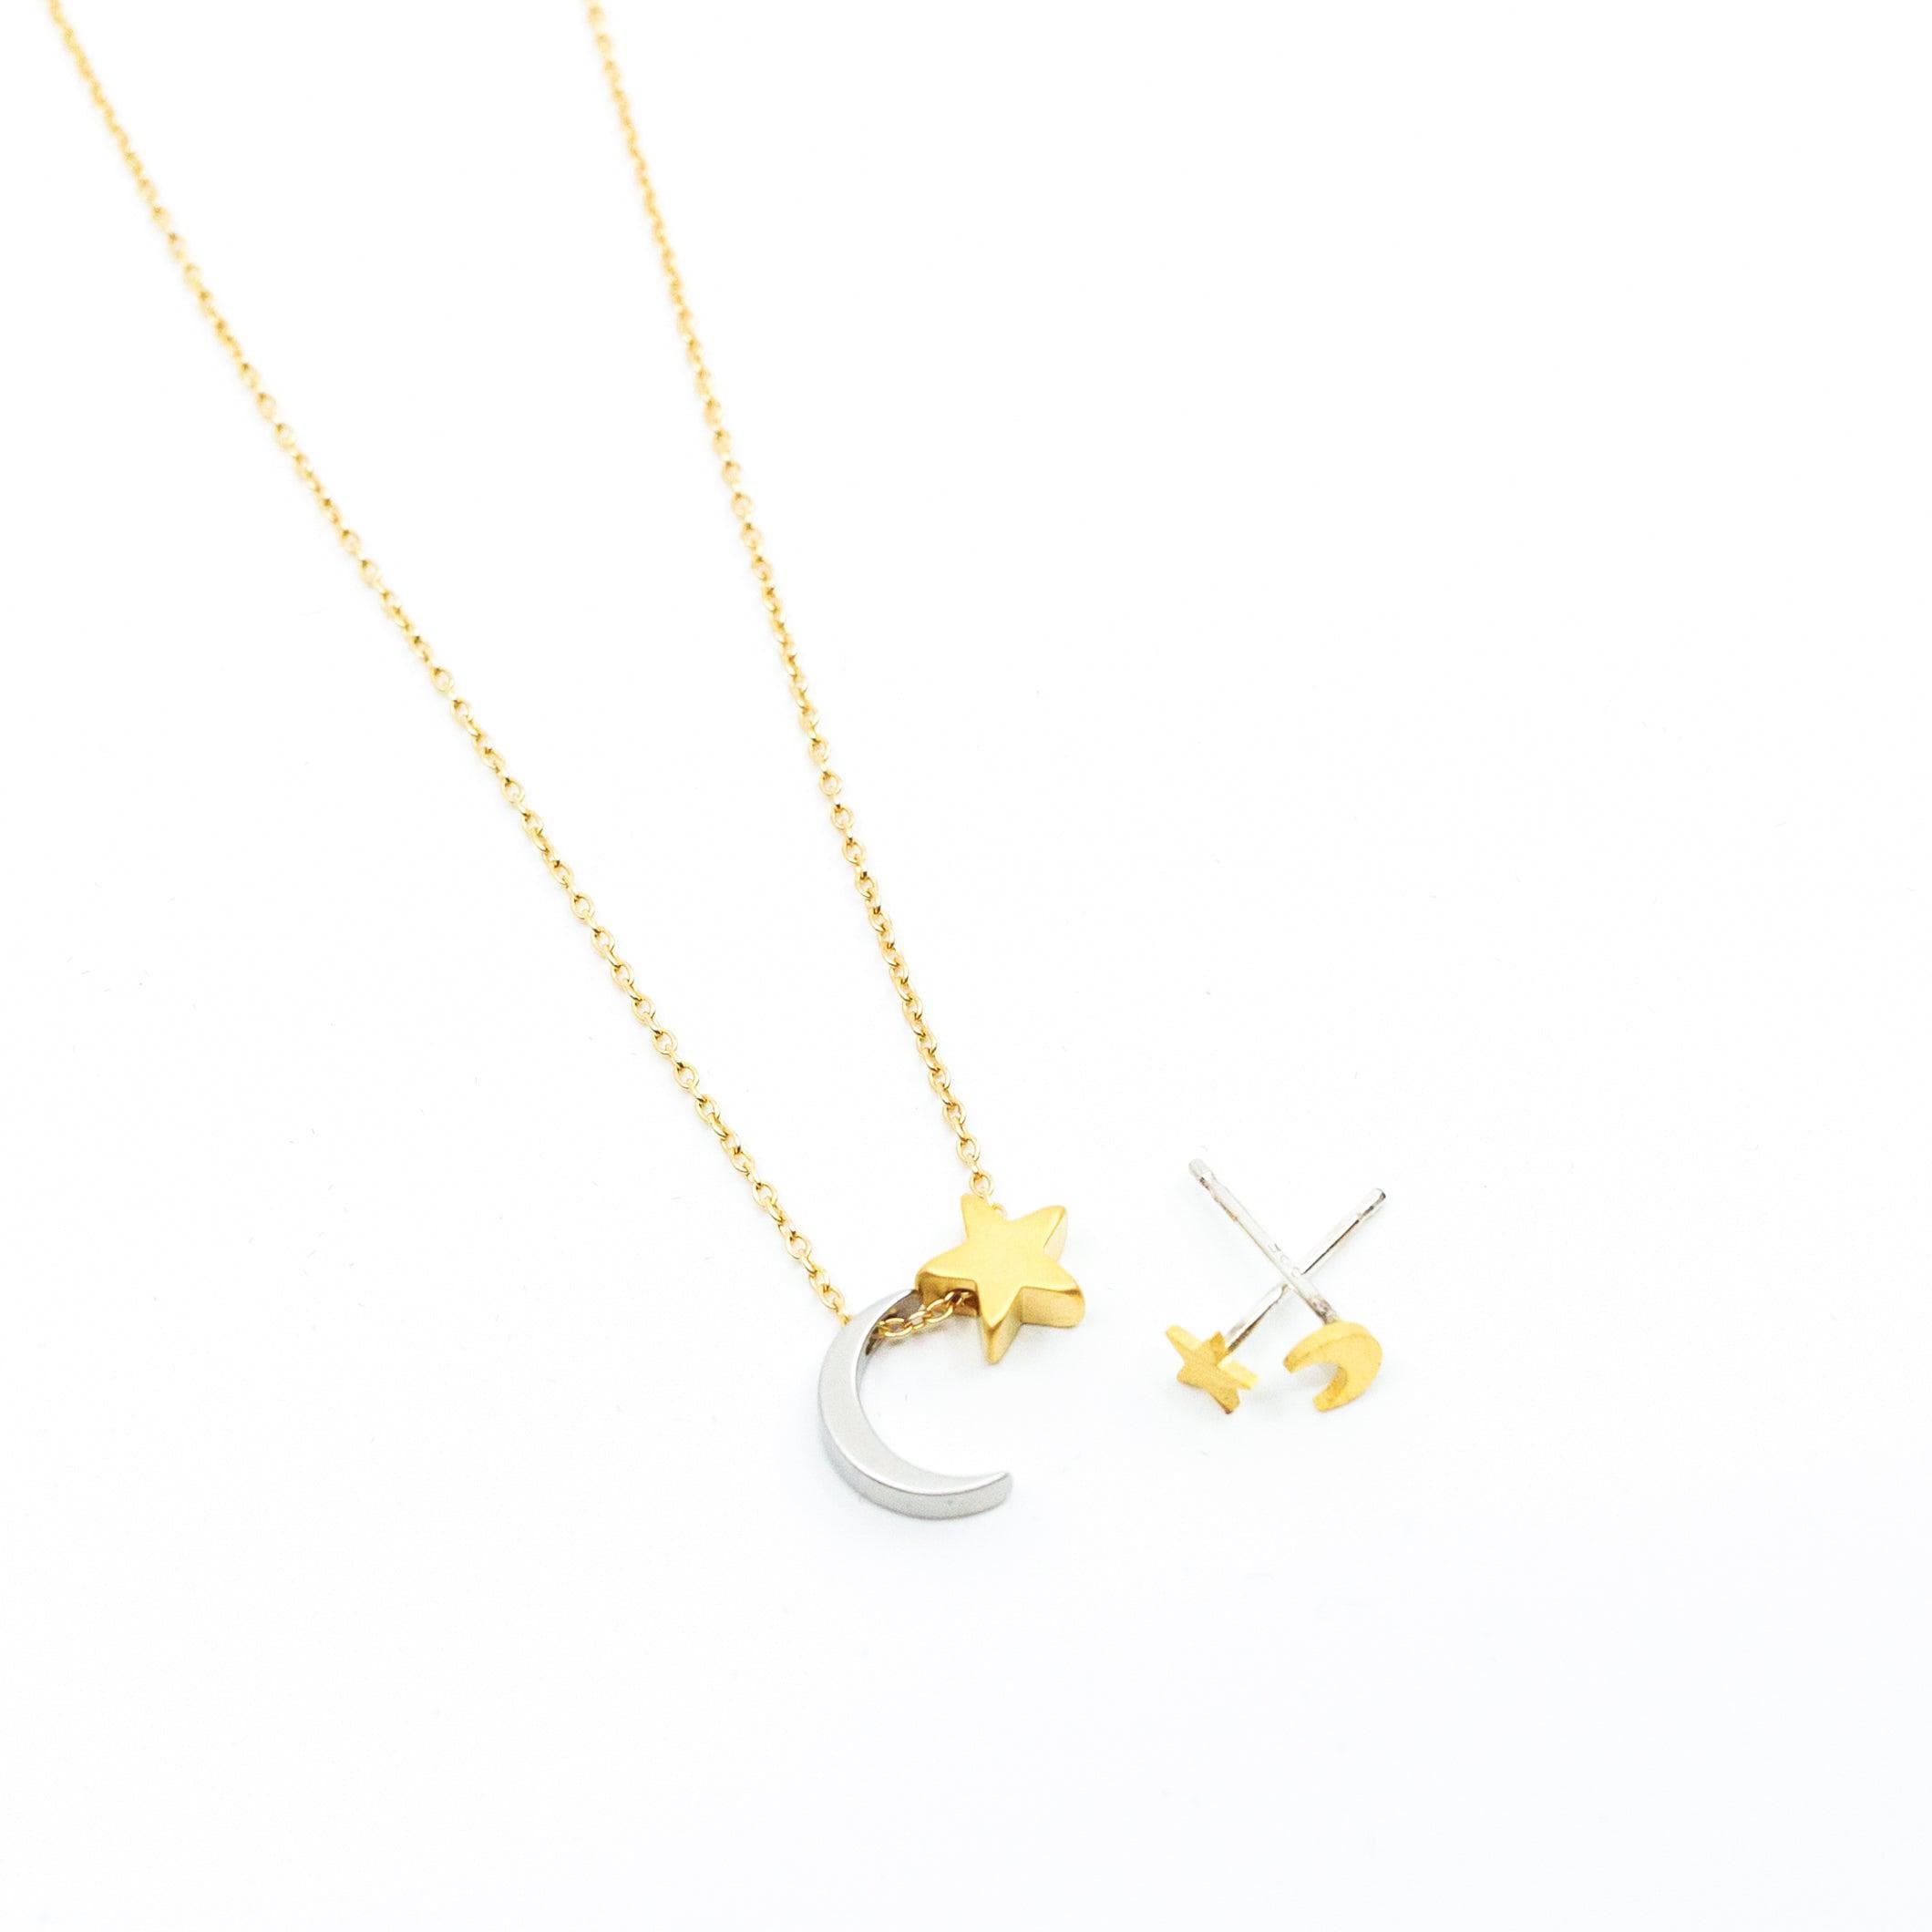 14K Gold Moon Star W/ Sun Necklace- Cz Sun W/ Moon & Star Pendant-  Celestial Necklace- Layered Necklace- Valentine's Day Gift-Gift Her